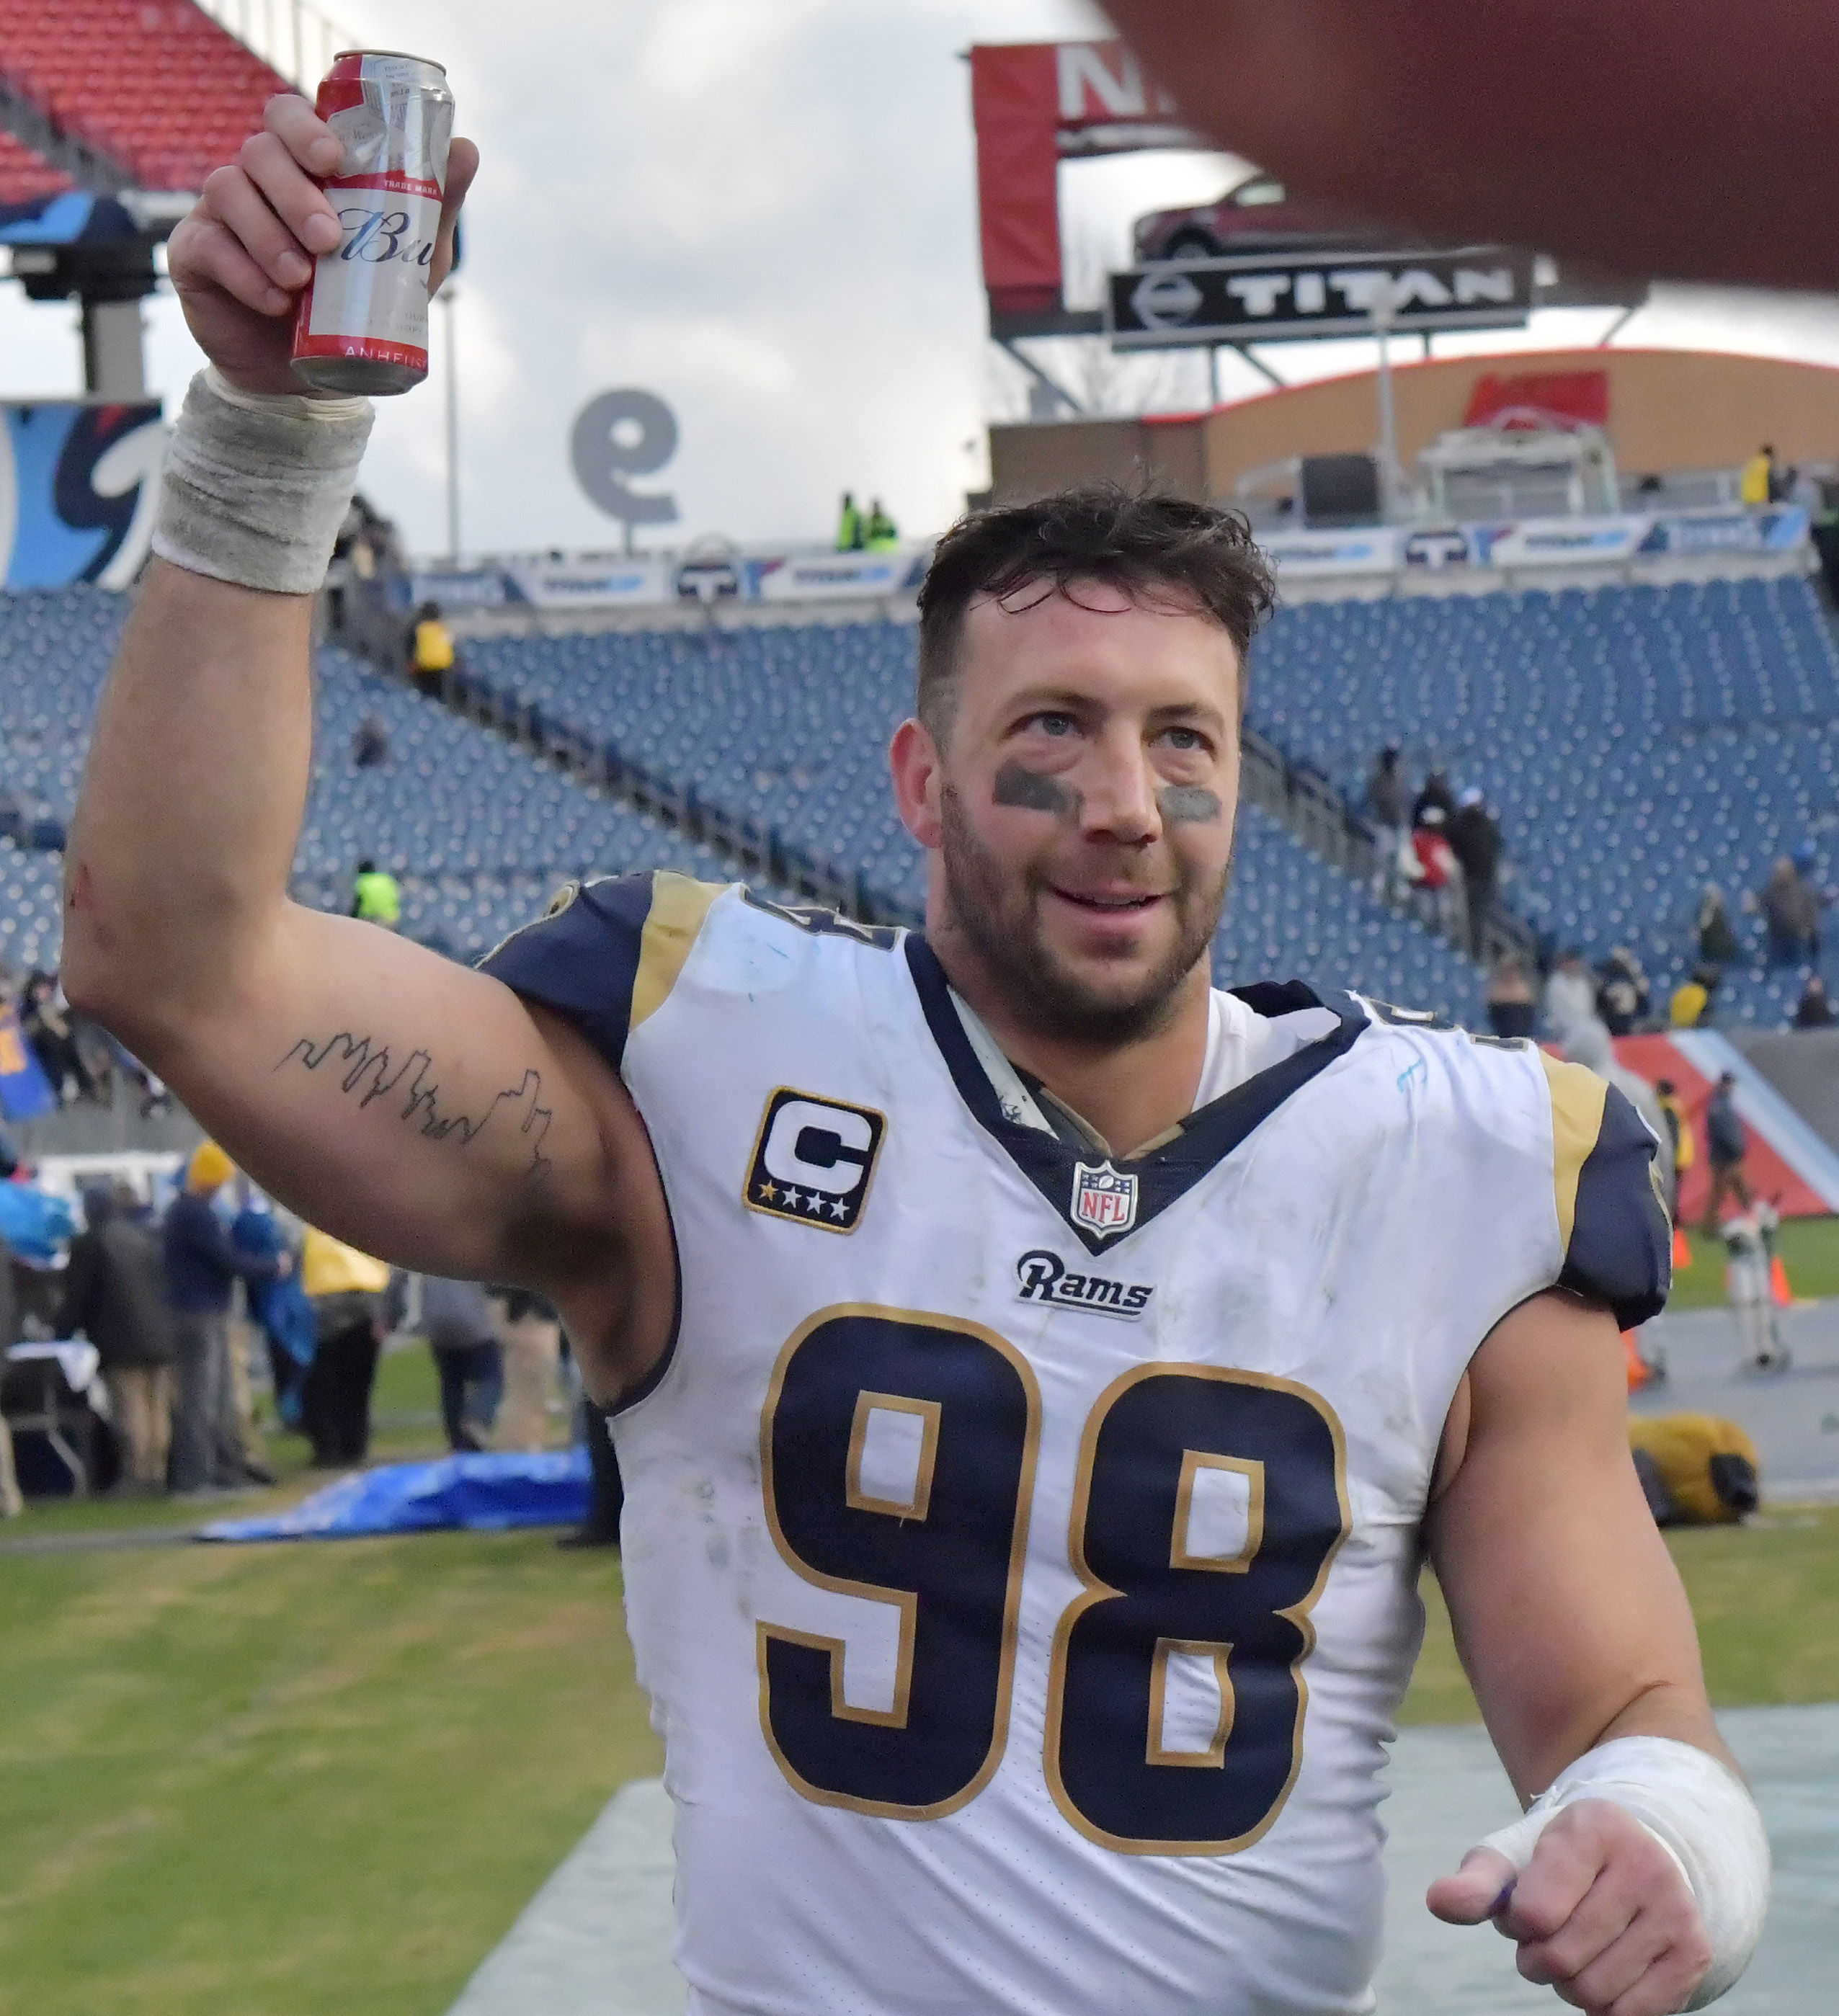 Report: Connor Barwin to the Giants